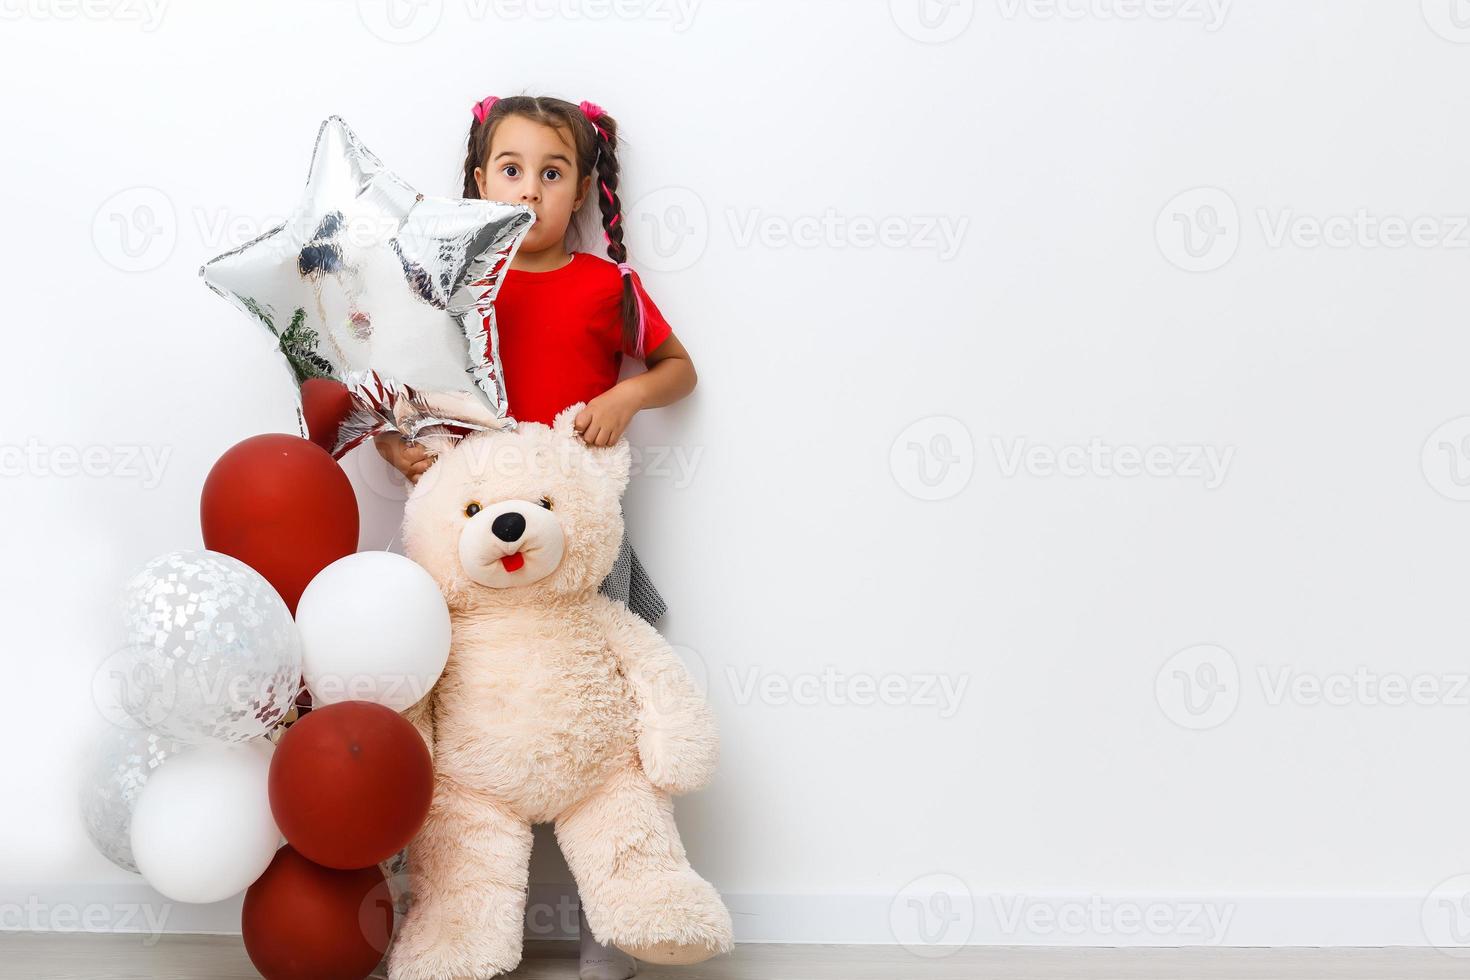 Portrait of smiling cheerful girl toying with teddy bear in game room. She is fantazing about air balloon photo